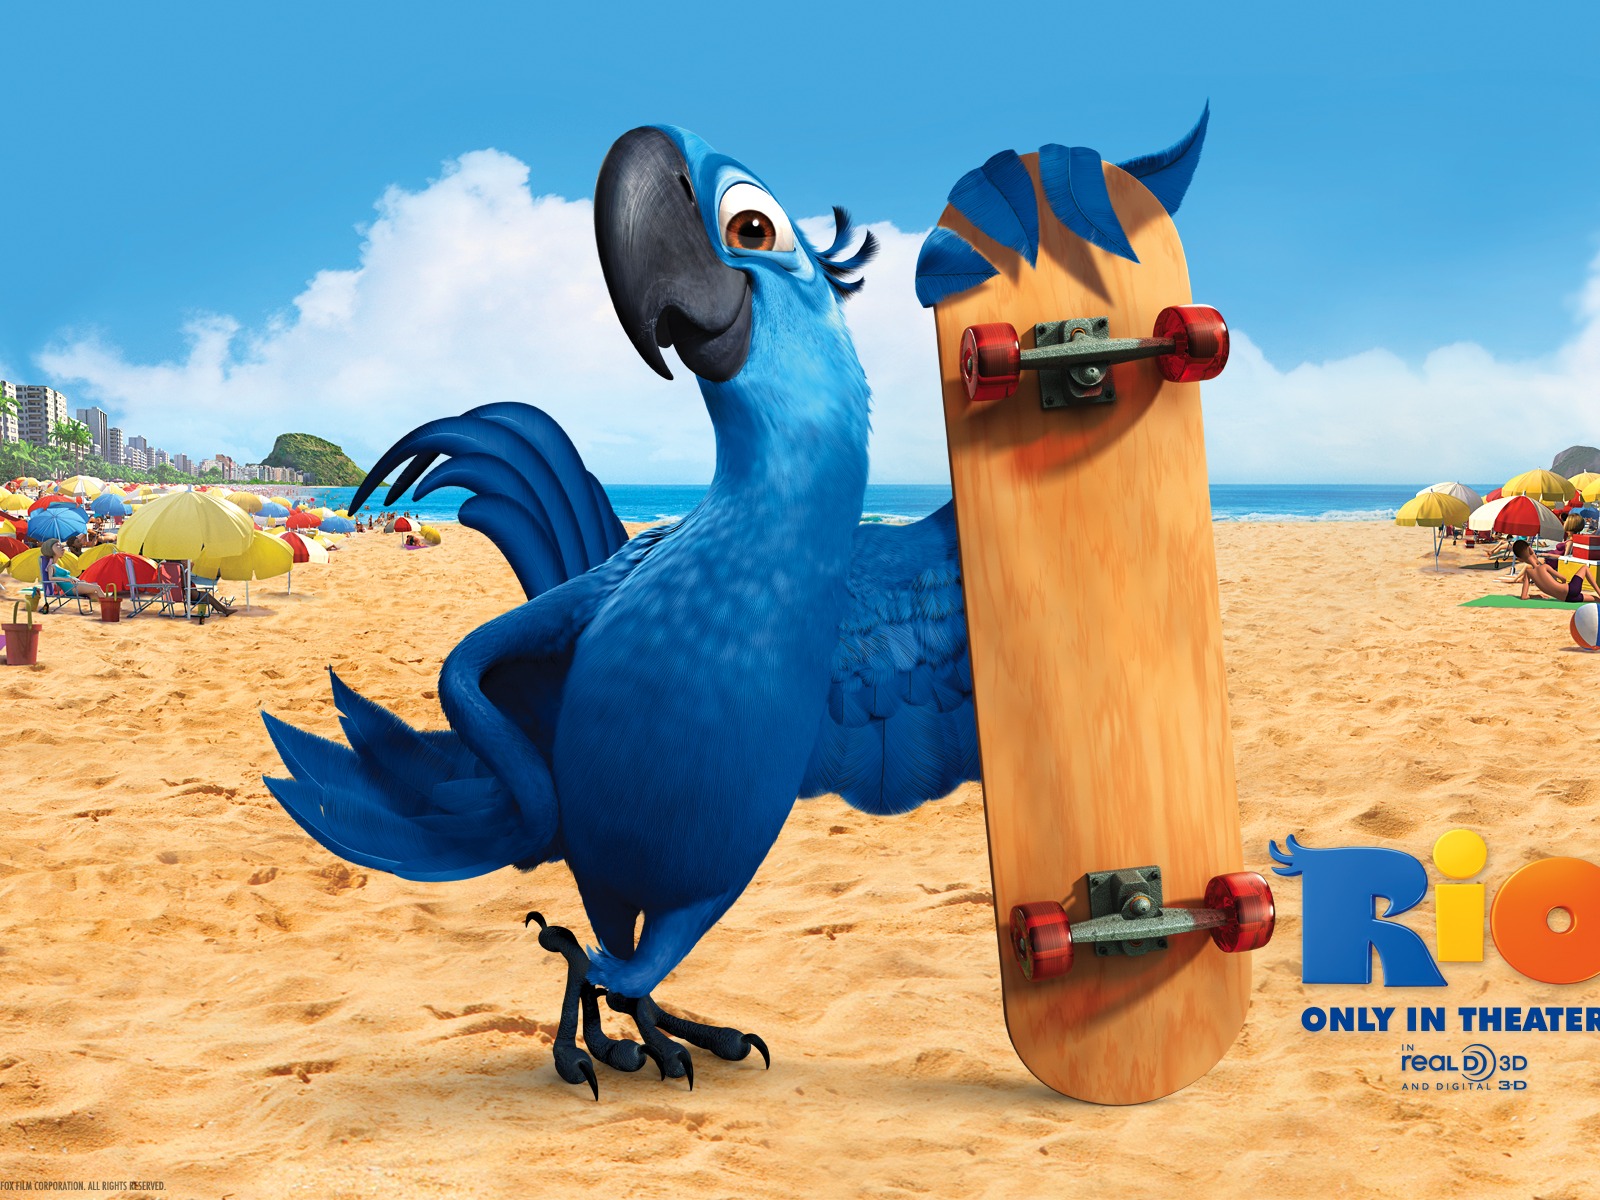 Rio 2011 wallpapers #3 - 1600x1200